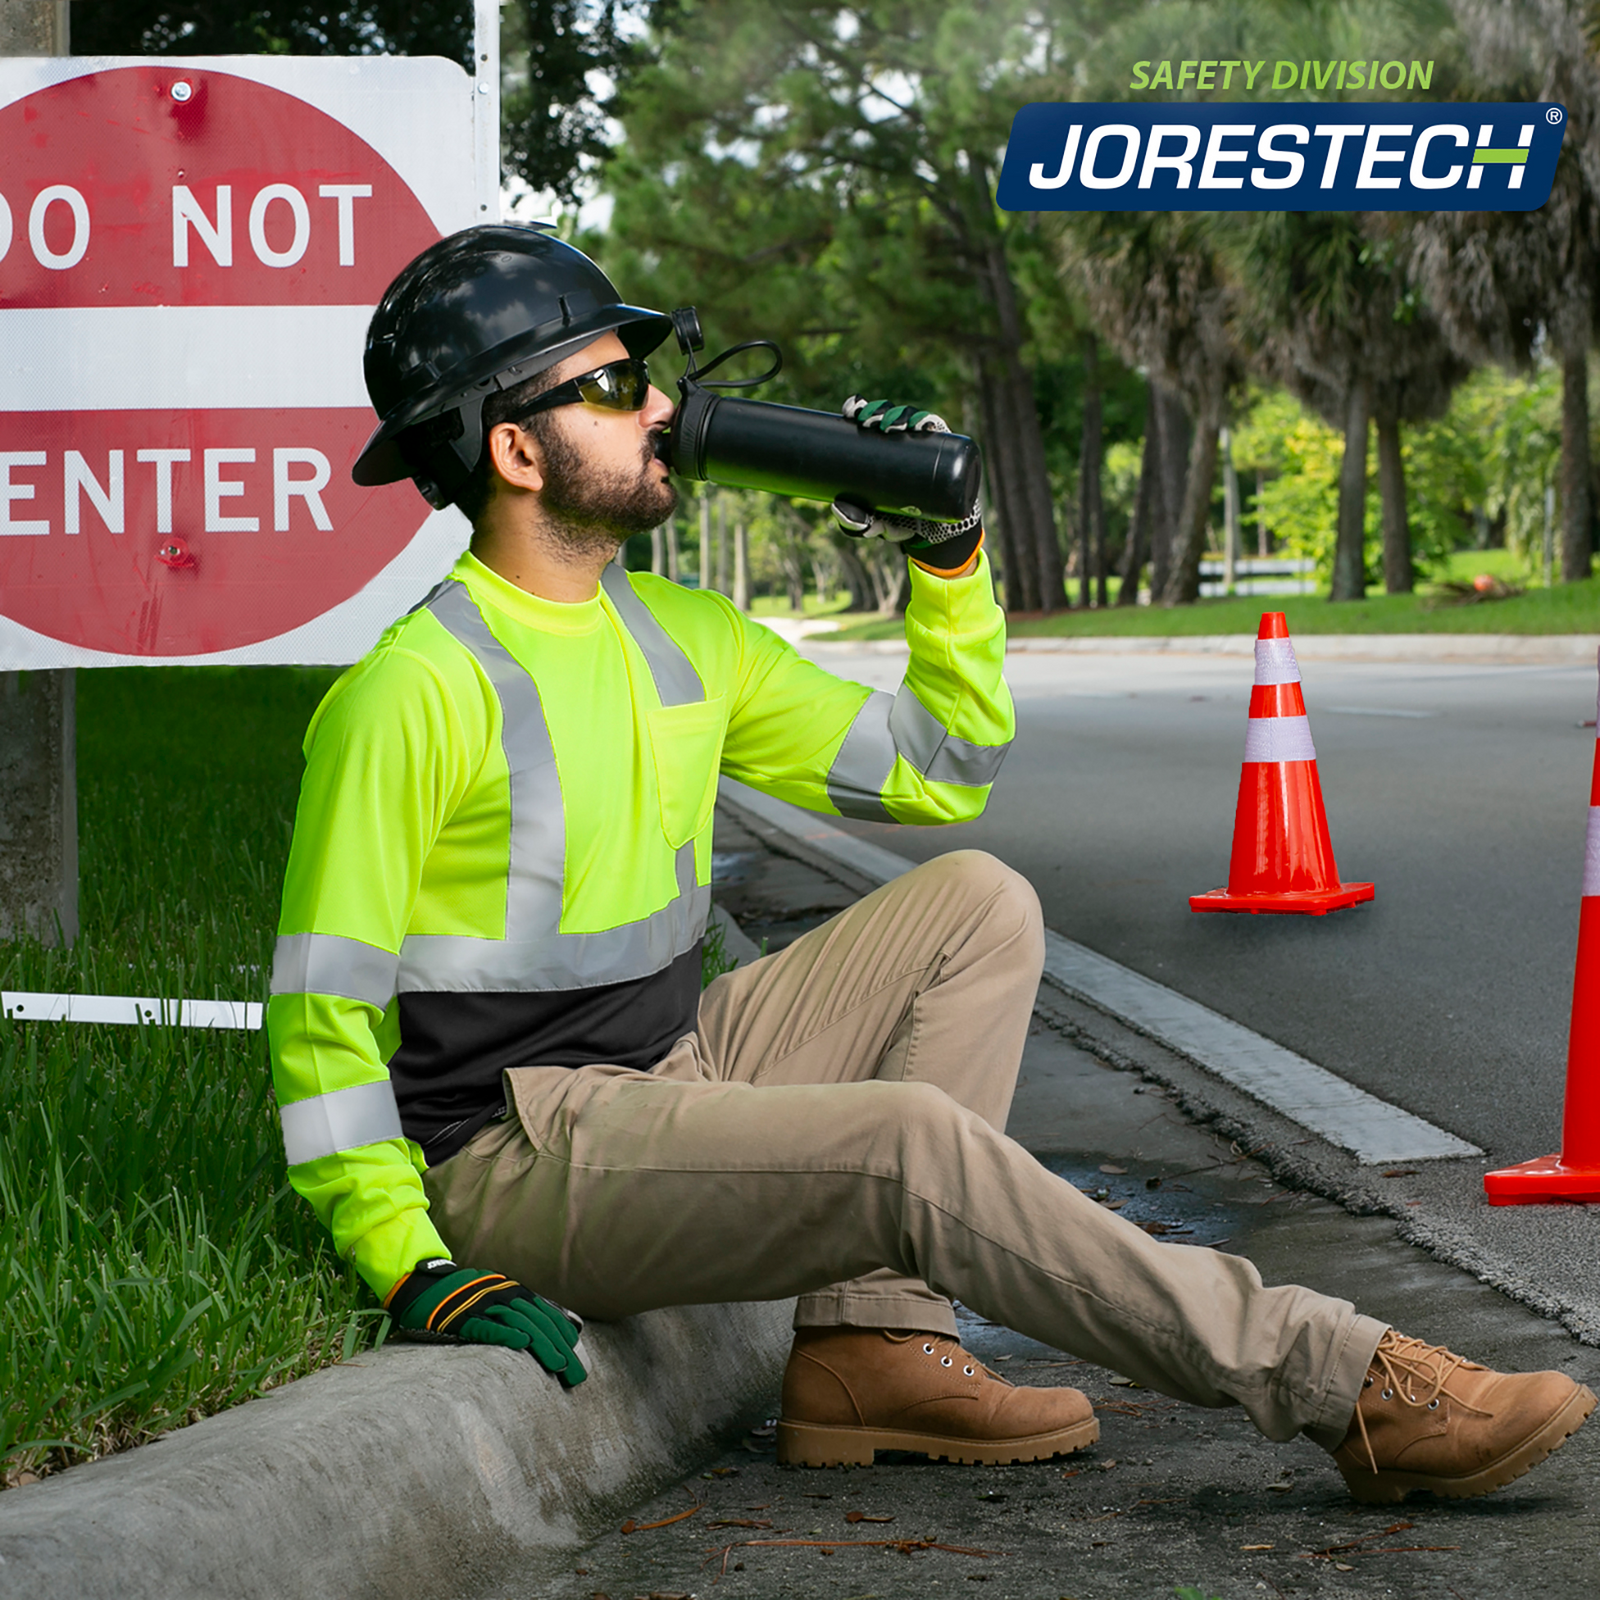 A worker wearing a JORESTECH hi vis safety shirt and a black hard hat while drinking water on the side of the road